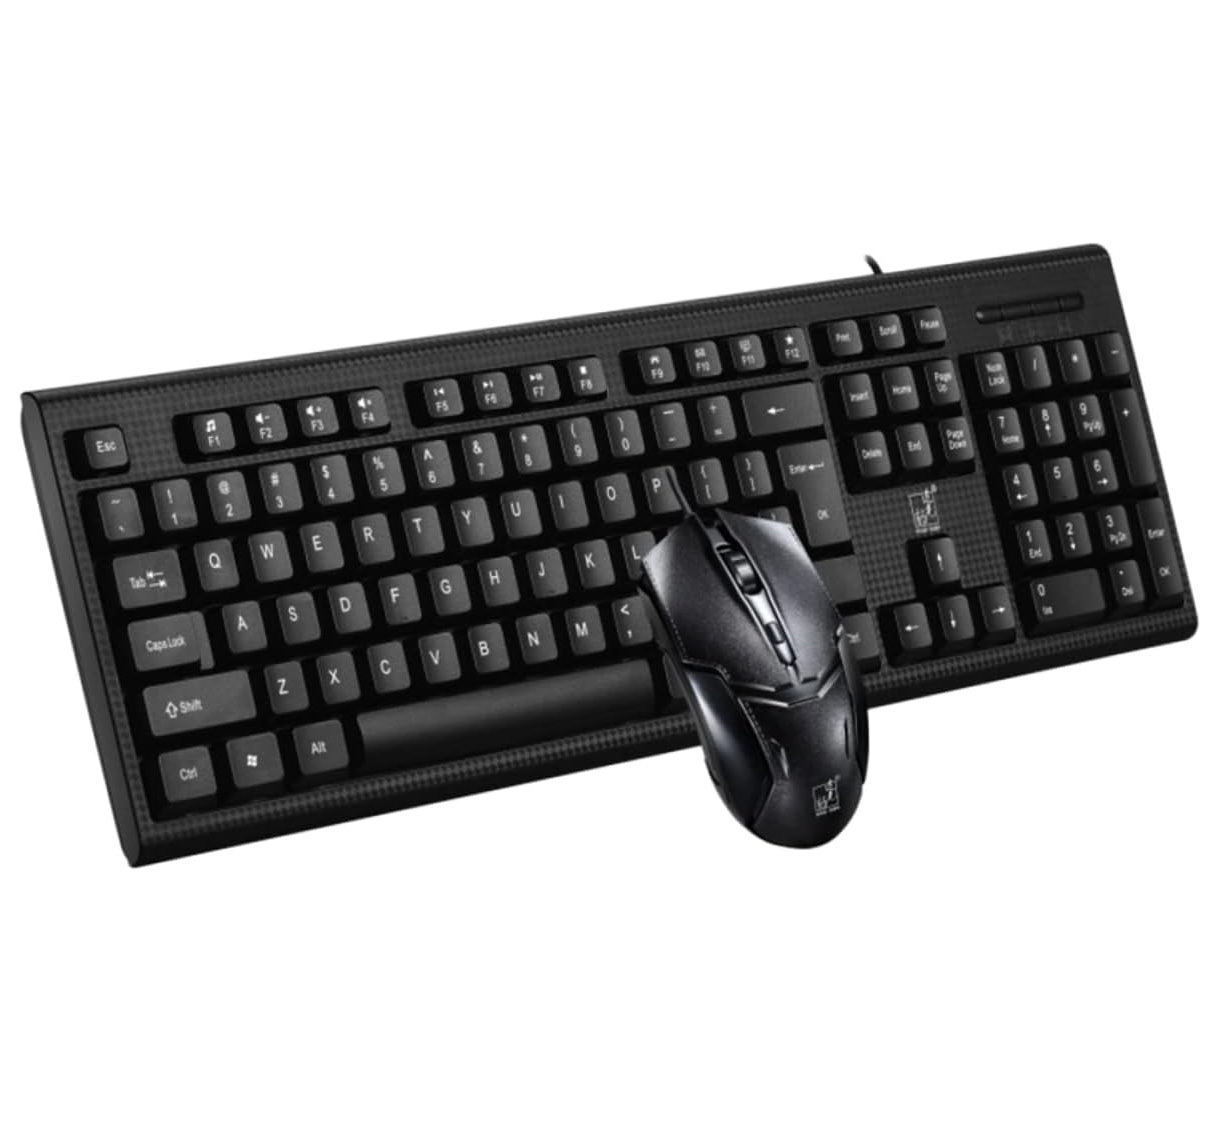 Office Professional Wired Keyboard and Mouse Combo Suit Set